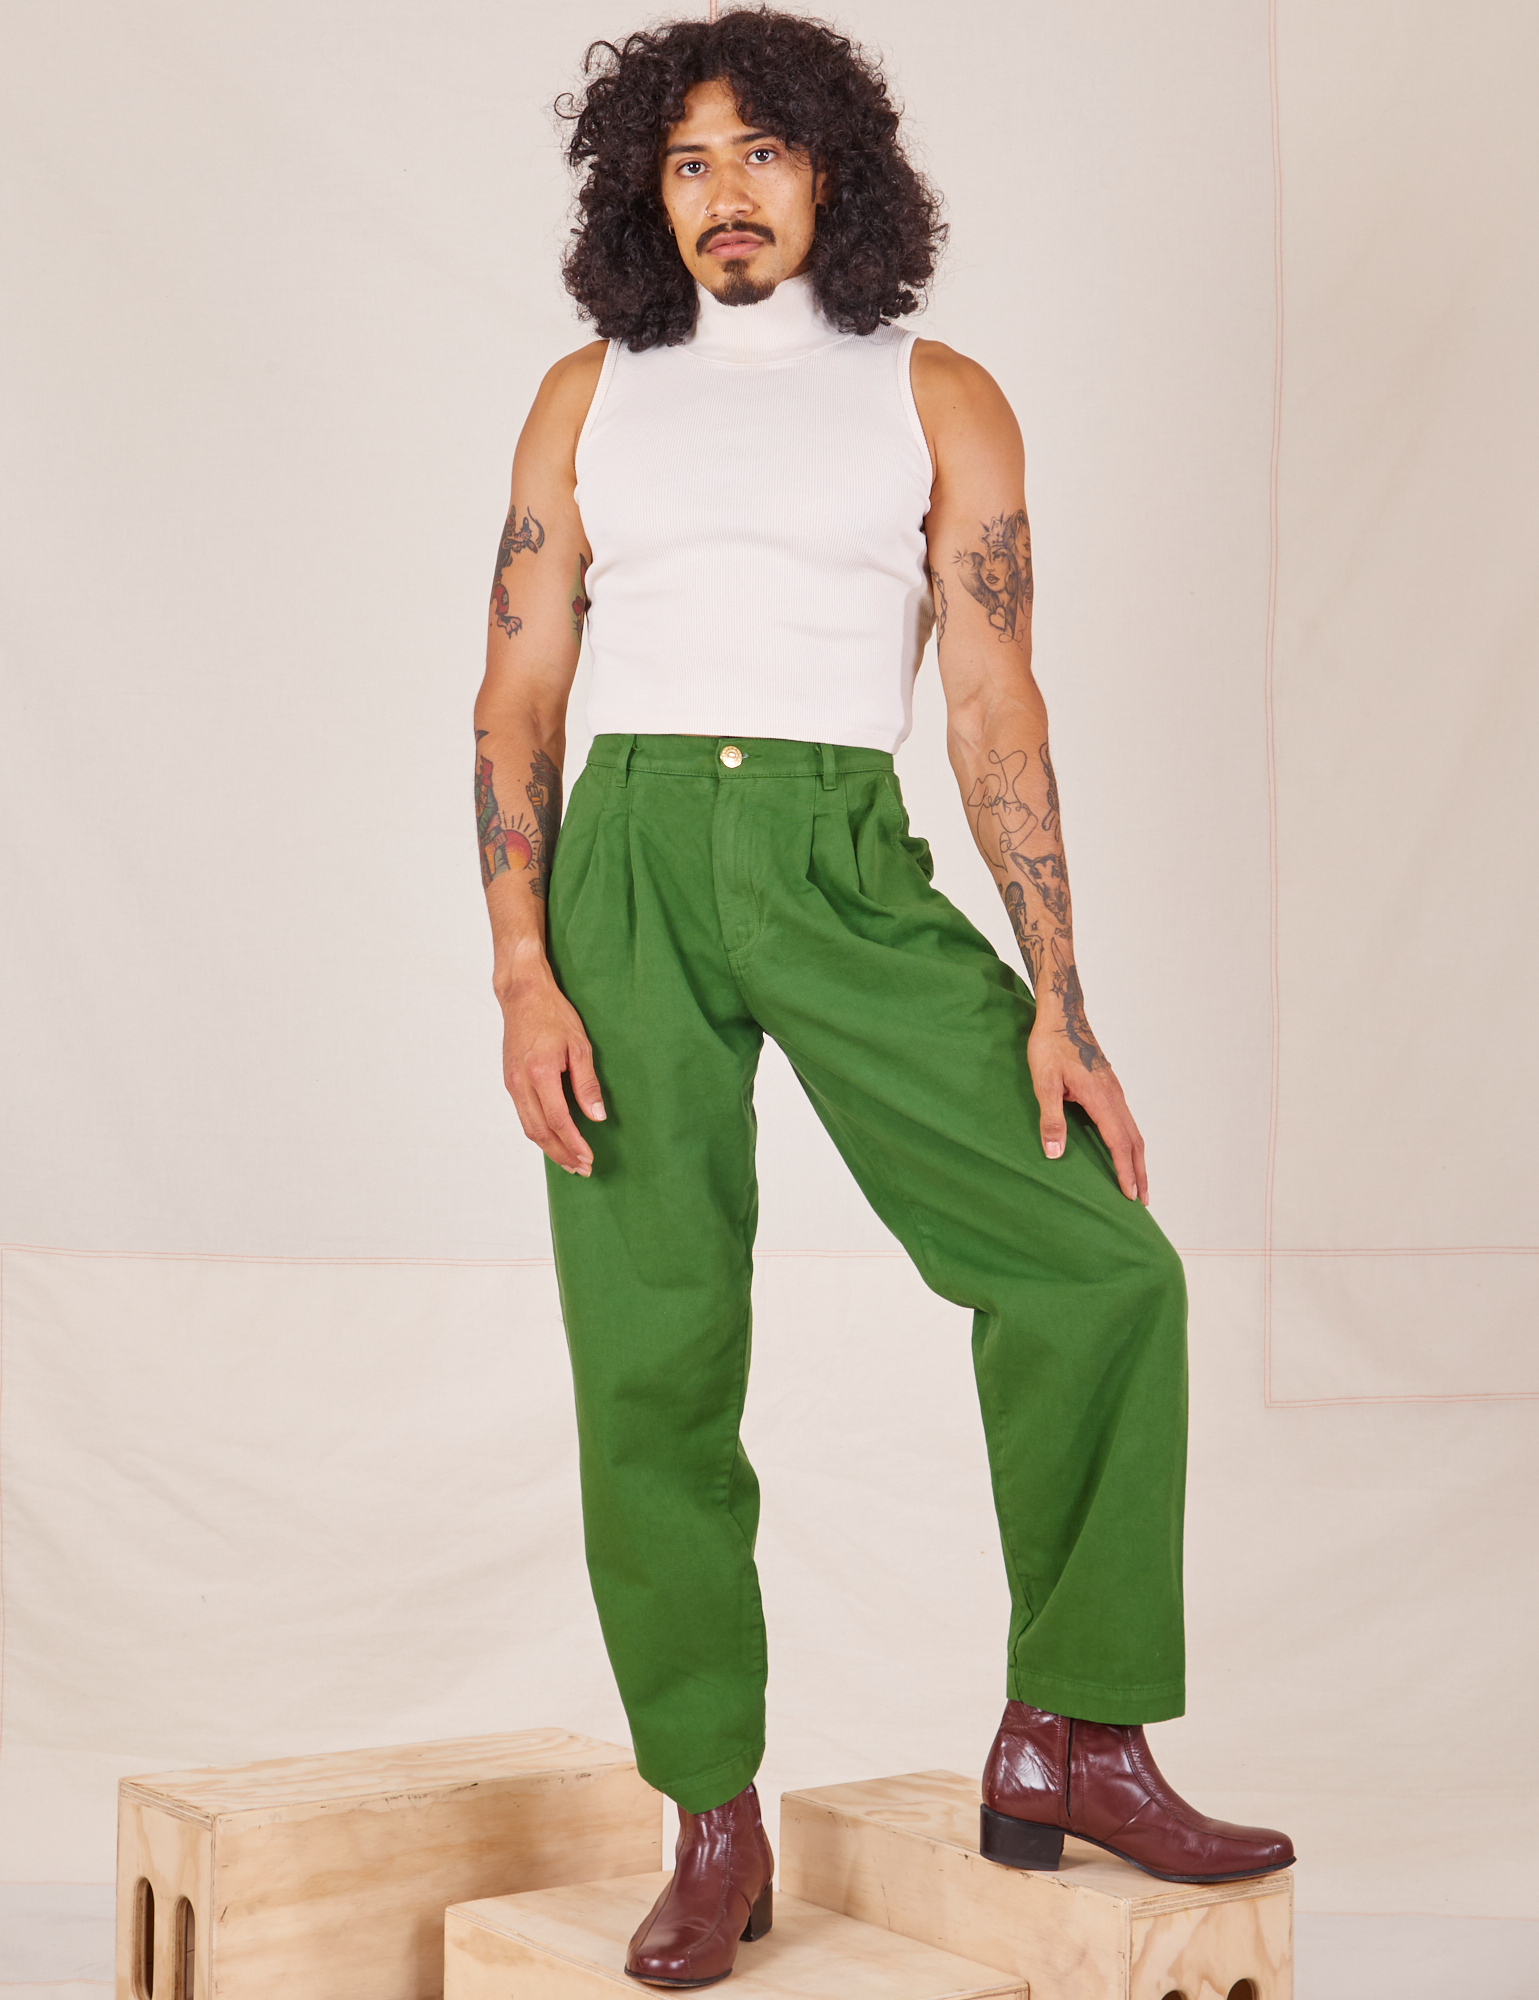 Jesse is 5&#39;8&quot; and wearing XXS Heavyweight Trousers in Lawn Green paired with vintage off-white Sleeveless Turtleneck